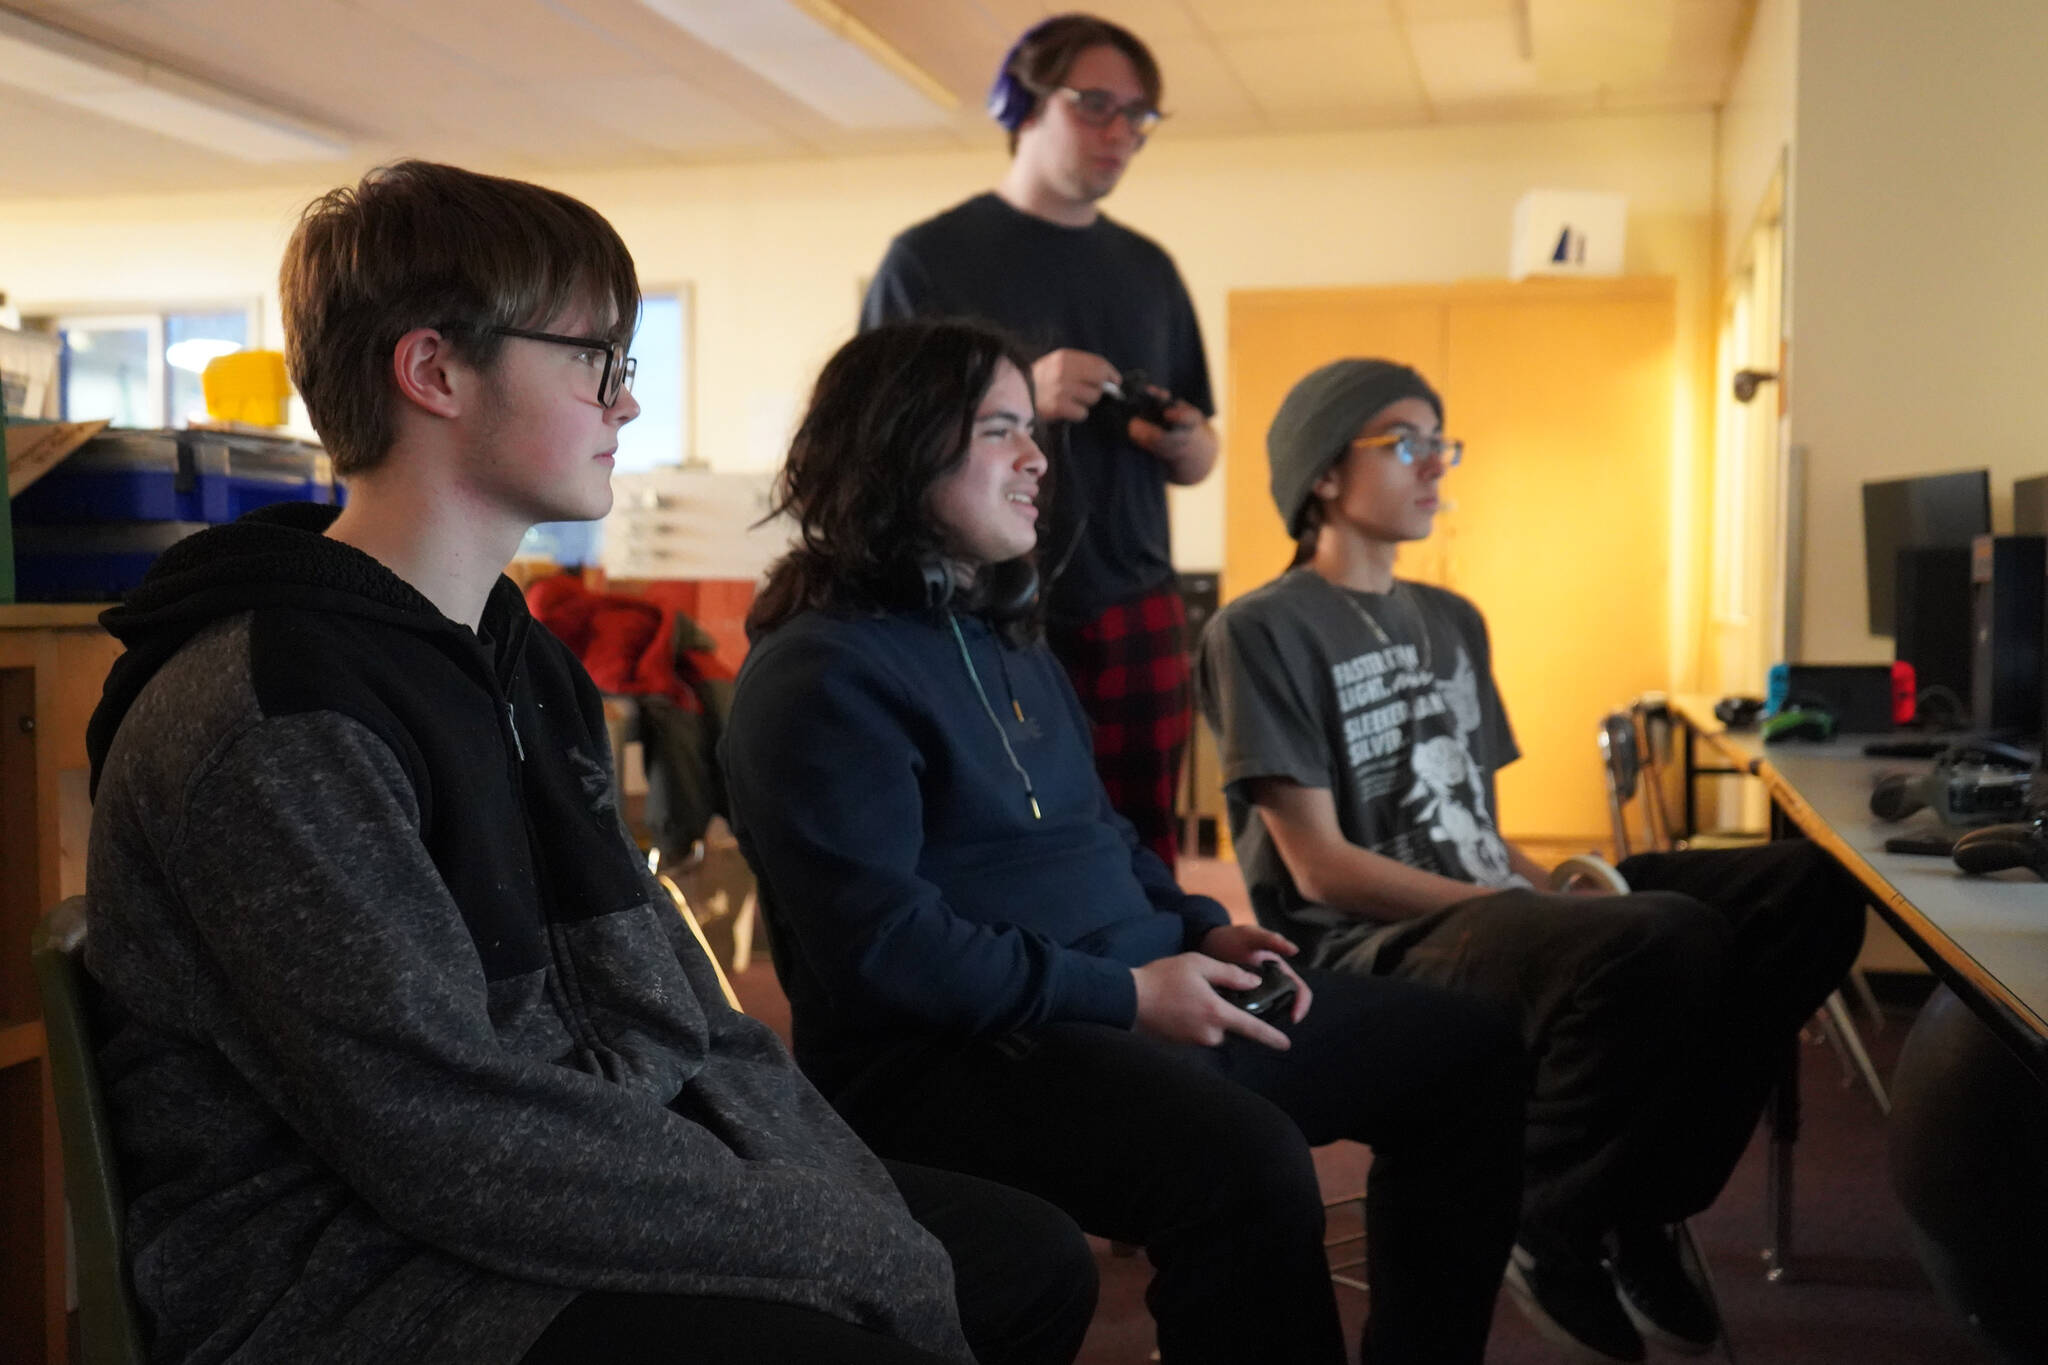 Eli Castro, center, competes while spectated by Blake Gillis, Kaizen Fuller and Kai Adkins during their state championship match against Lathrop High School in Super Smash Bros. Ultimate at Kenai Central High School in Kenai, Alaska, on Thursday, Dec. 14, 2023. (Jake Dye/Peninsula Clarion)